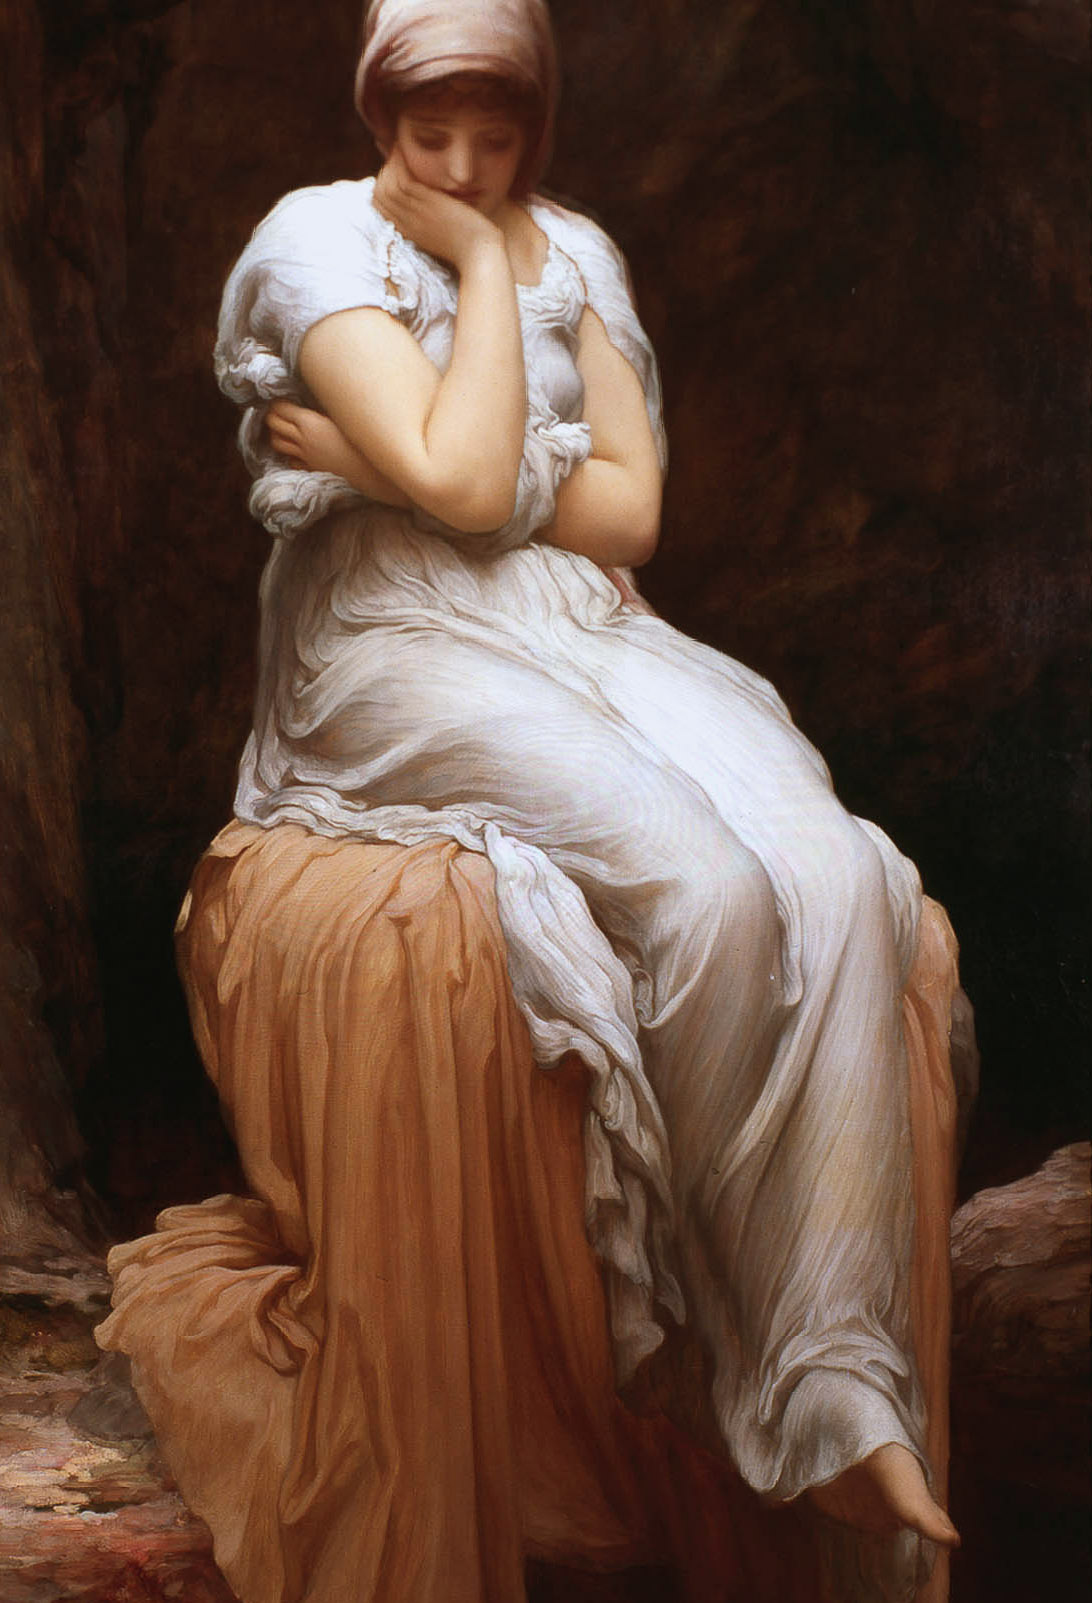 Painting of a young white woman
in a white gown and head scarf,
sitting alone on tall a cloth-draped box,
with her arms crossed
and her head looking down,
resting on one hand.
